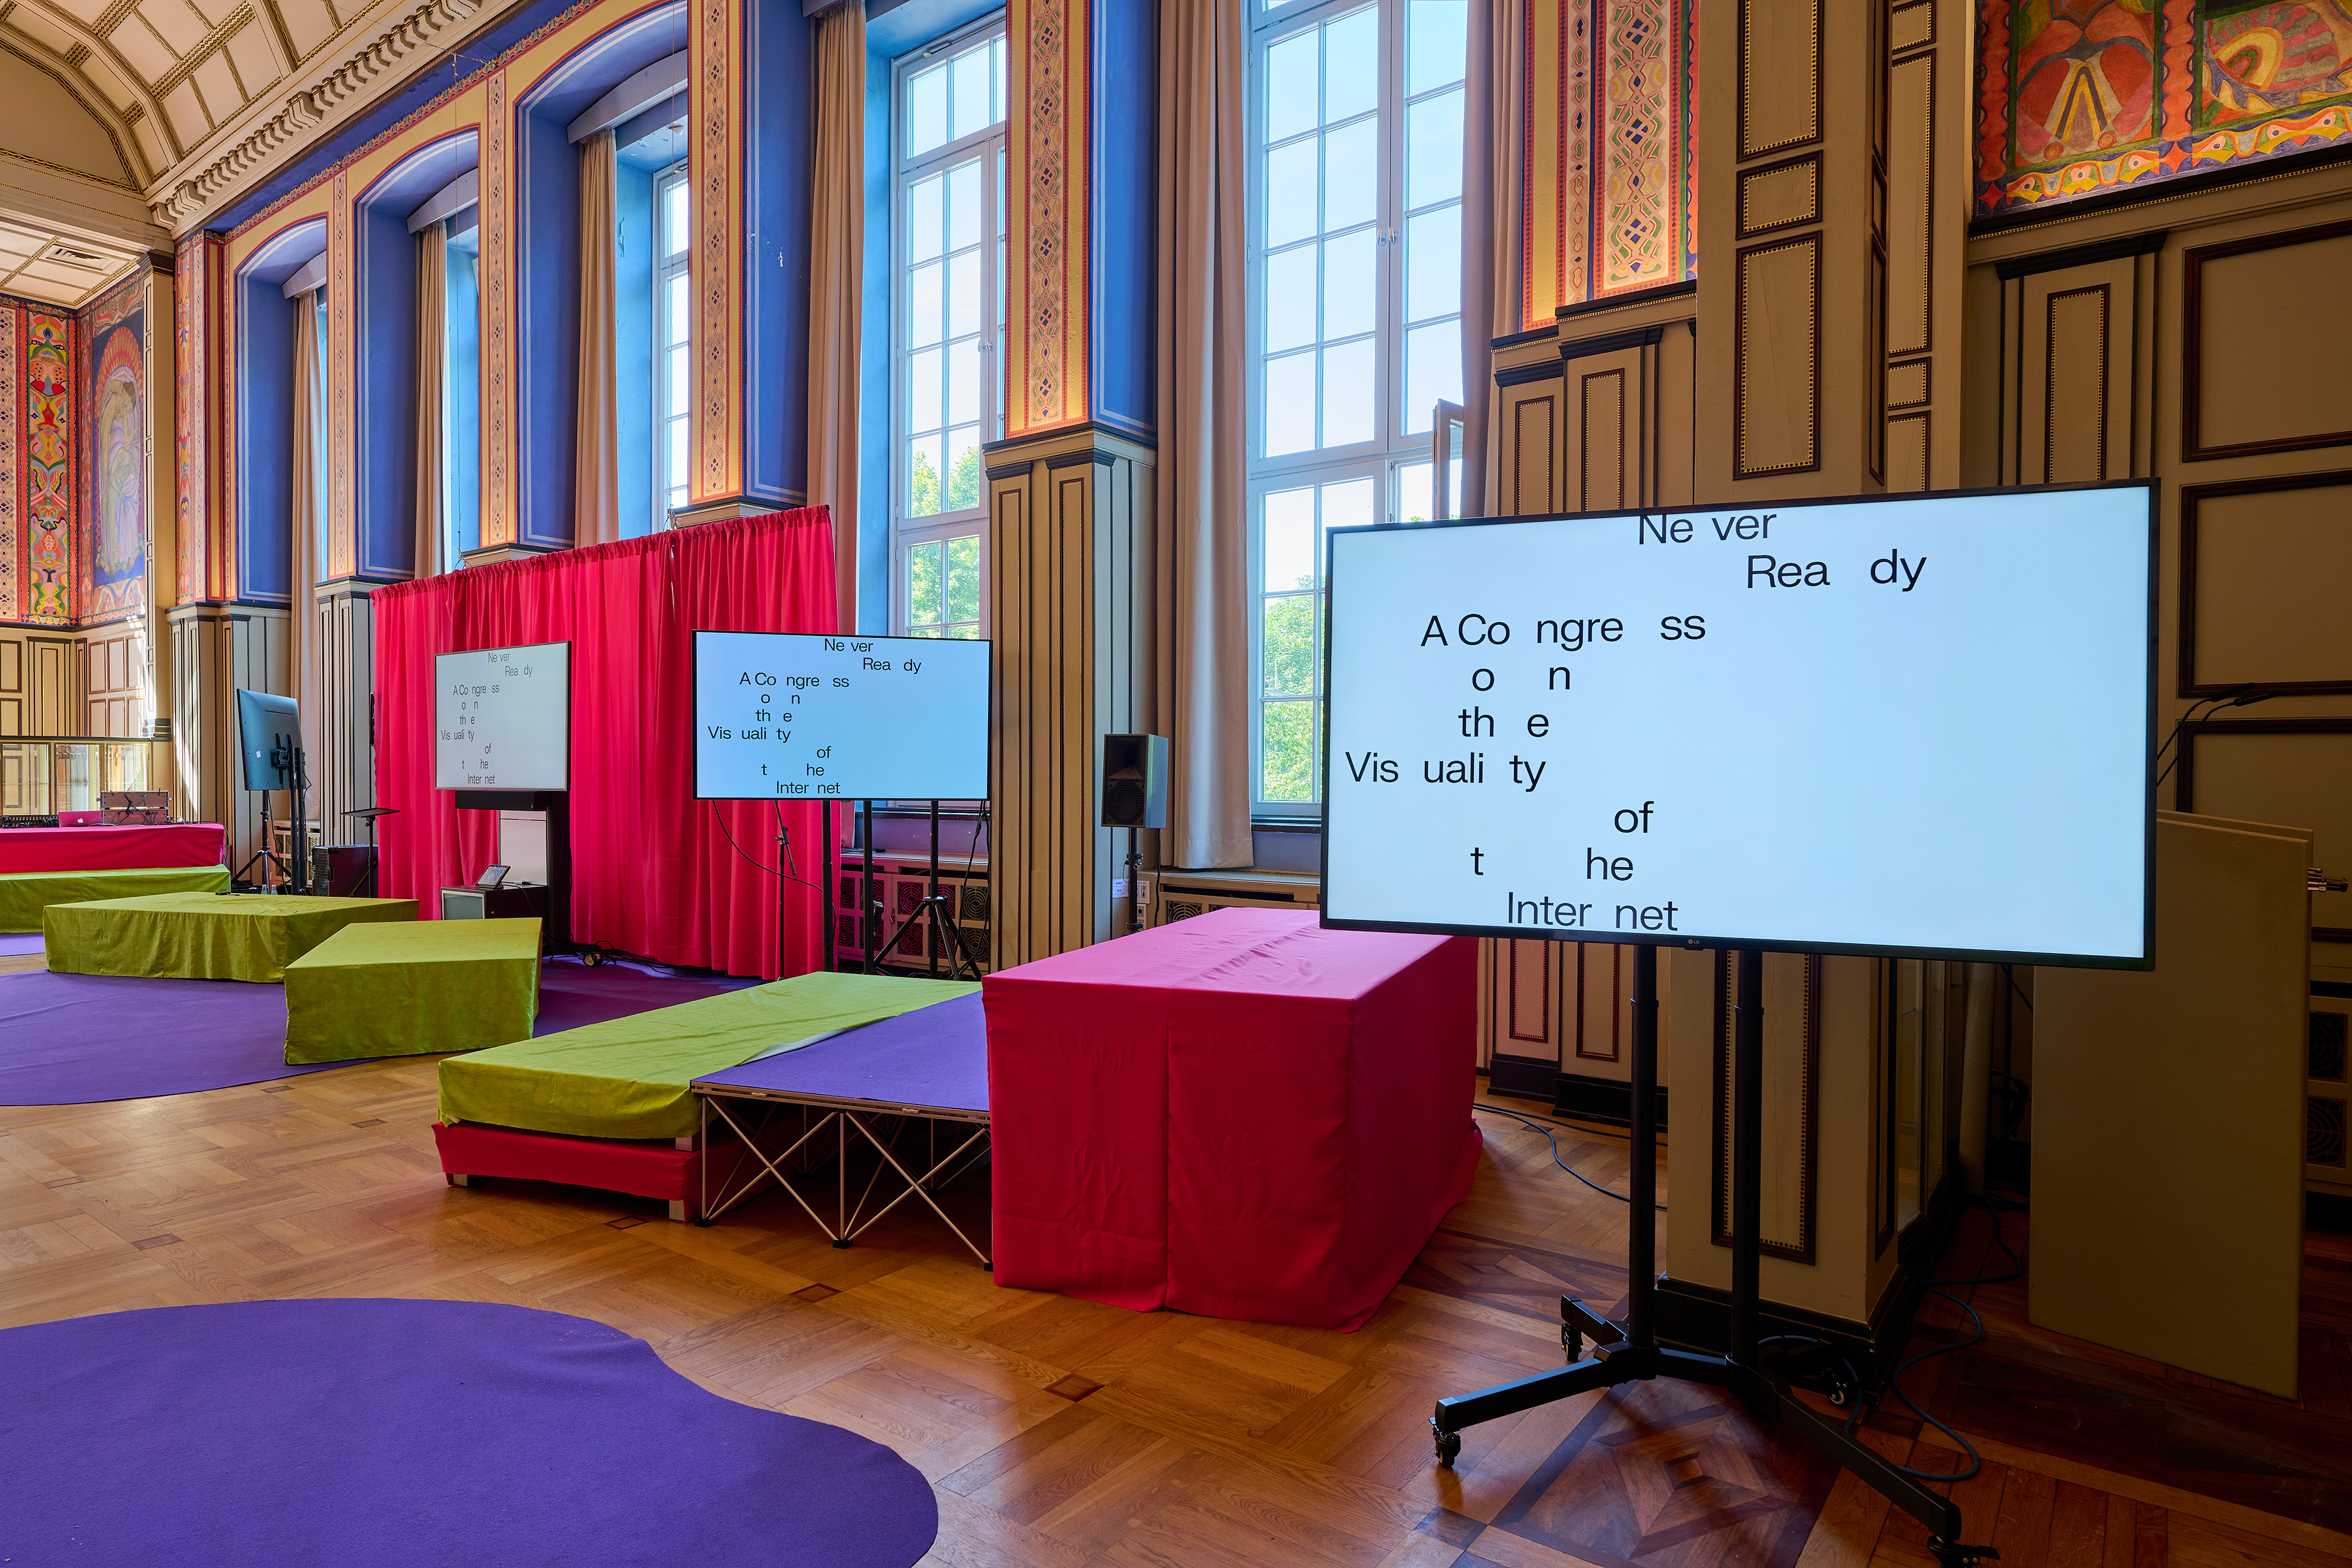 Big screens in a colorful decorated room, showing black airy letters on white ground.